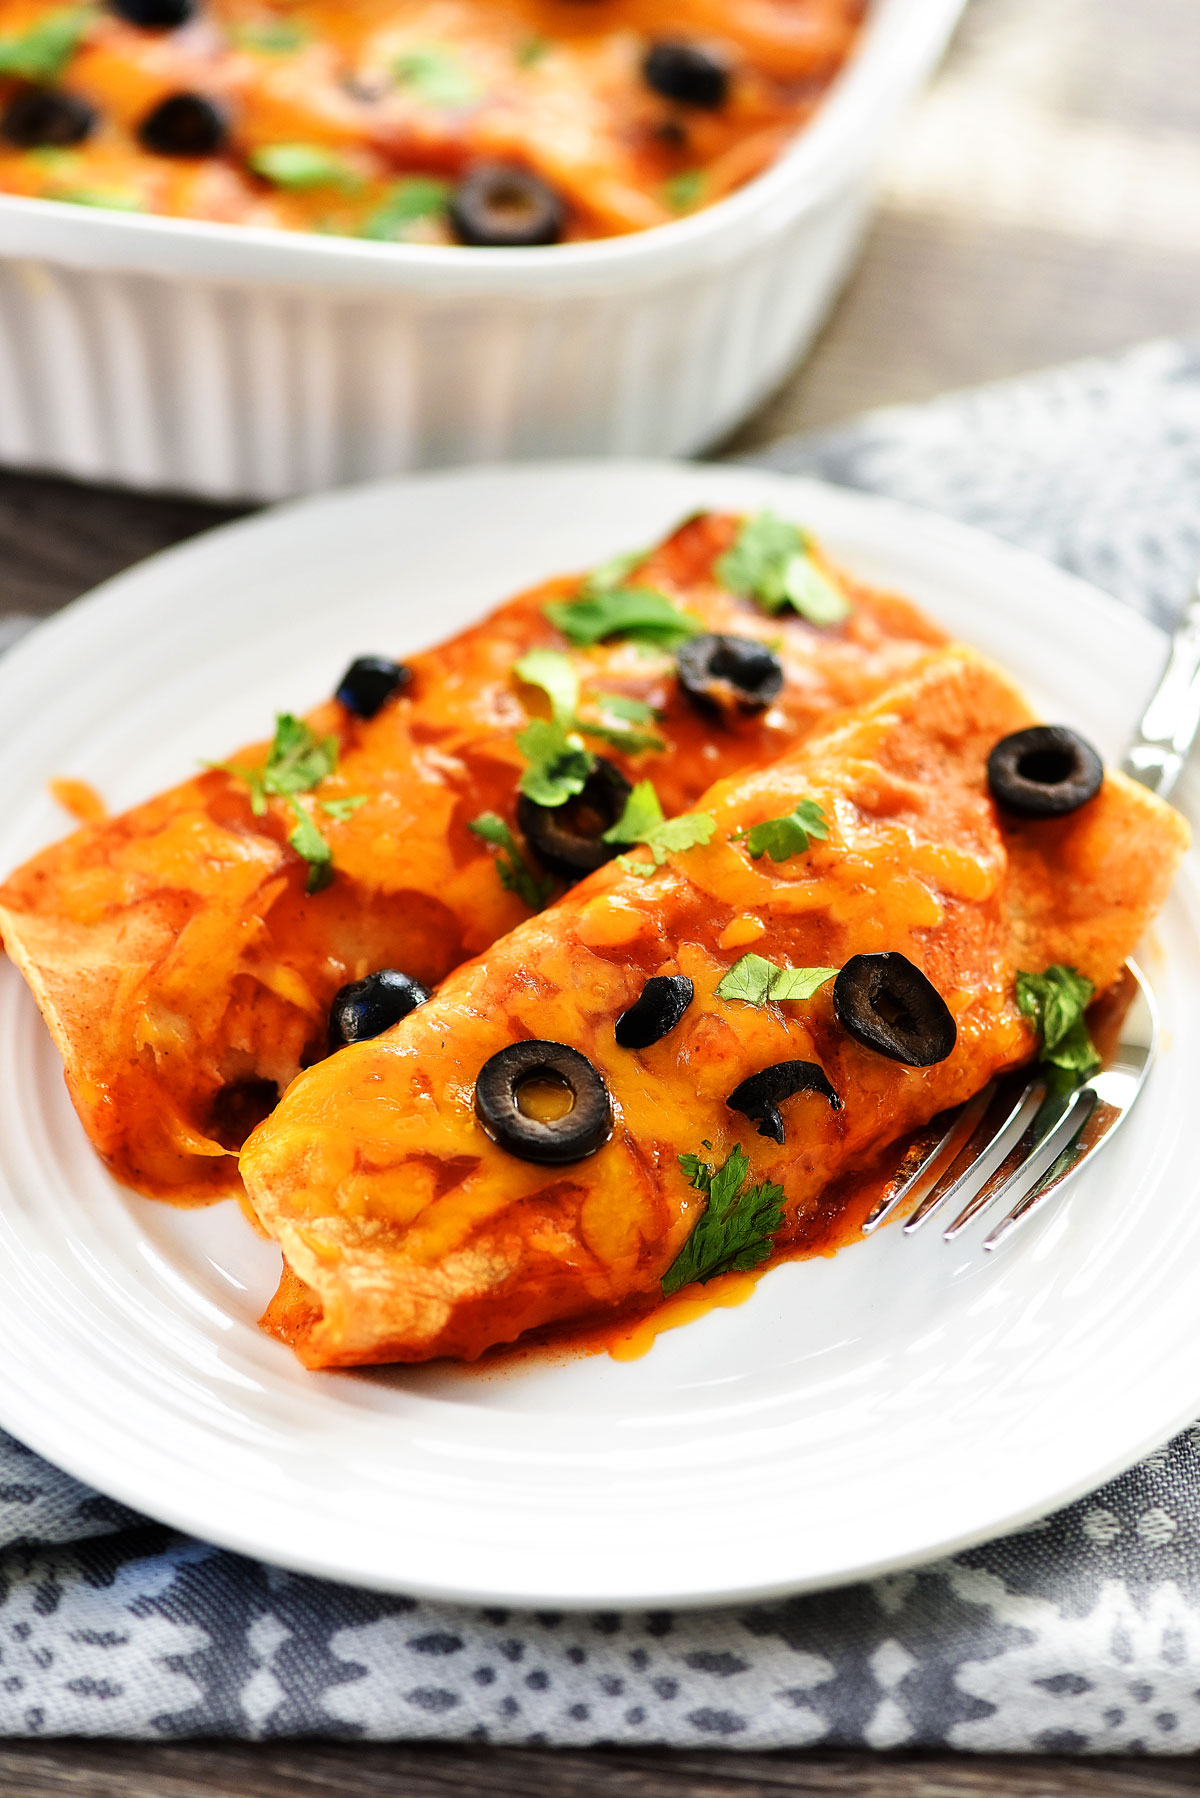 Beef Enchiladas that are a bit lighter in calories.